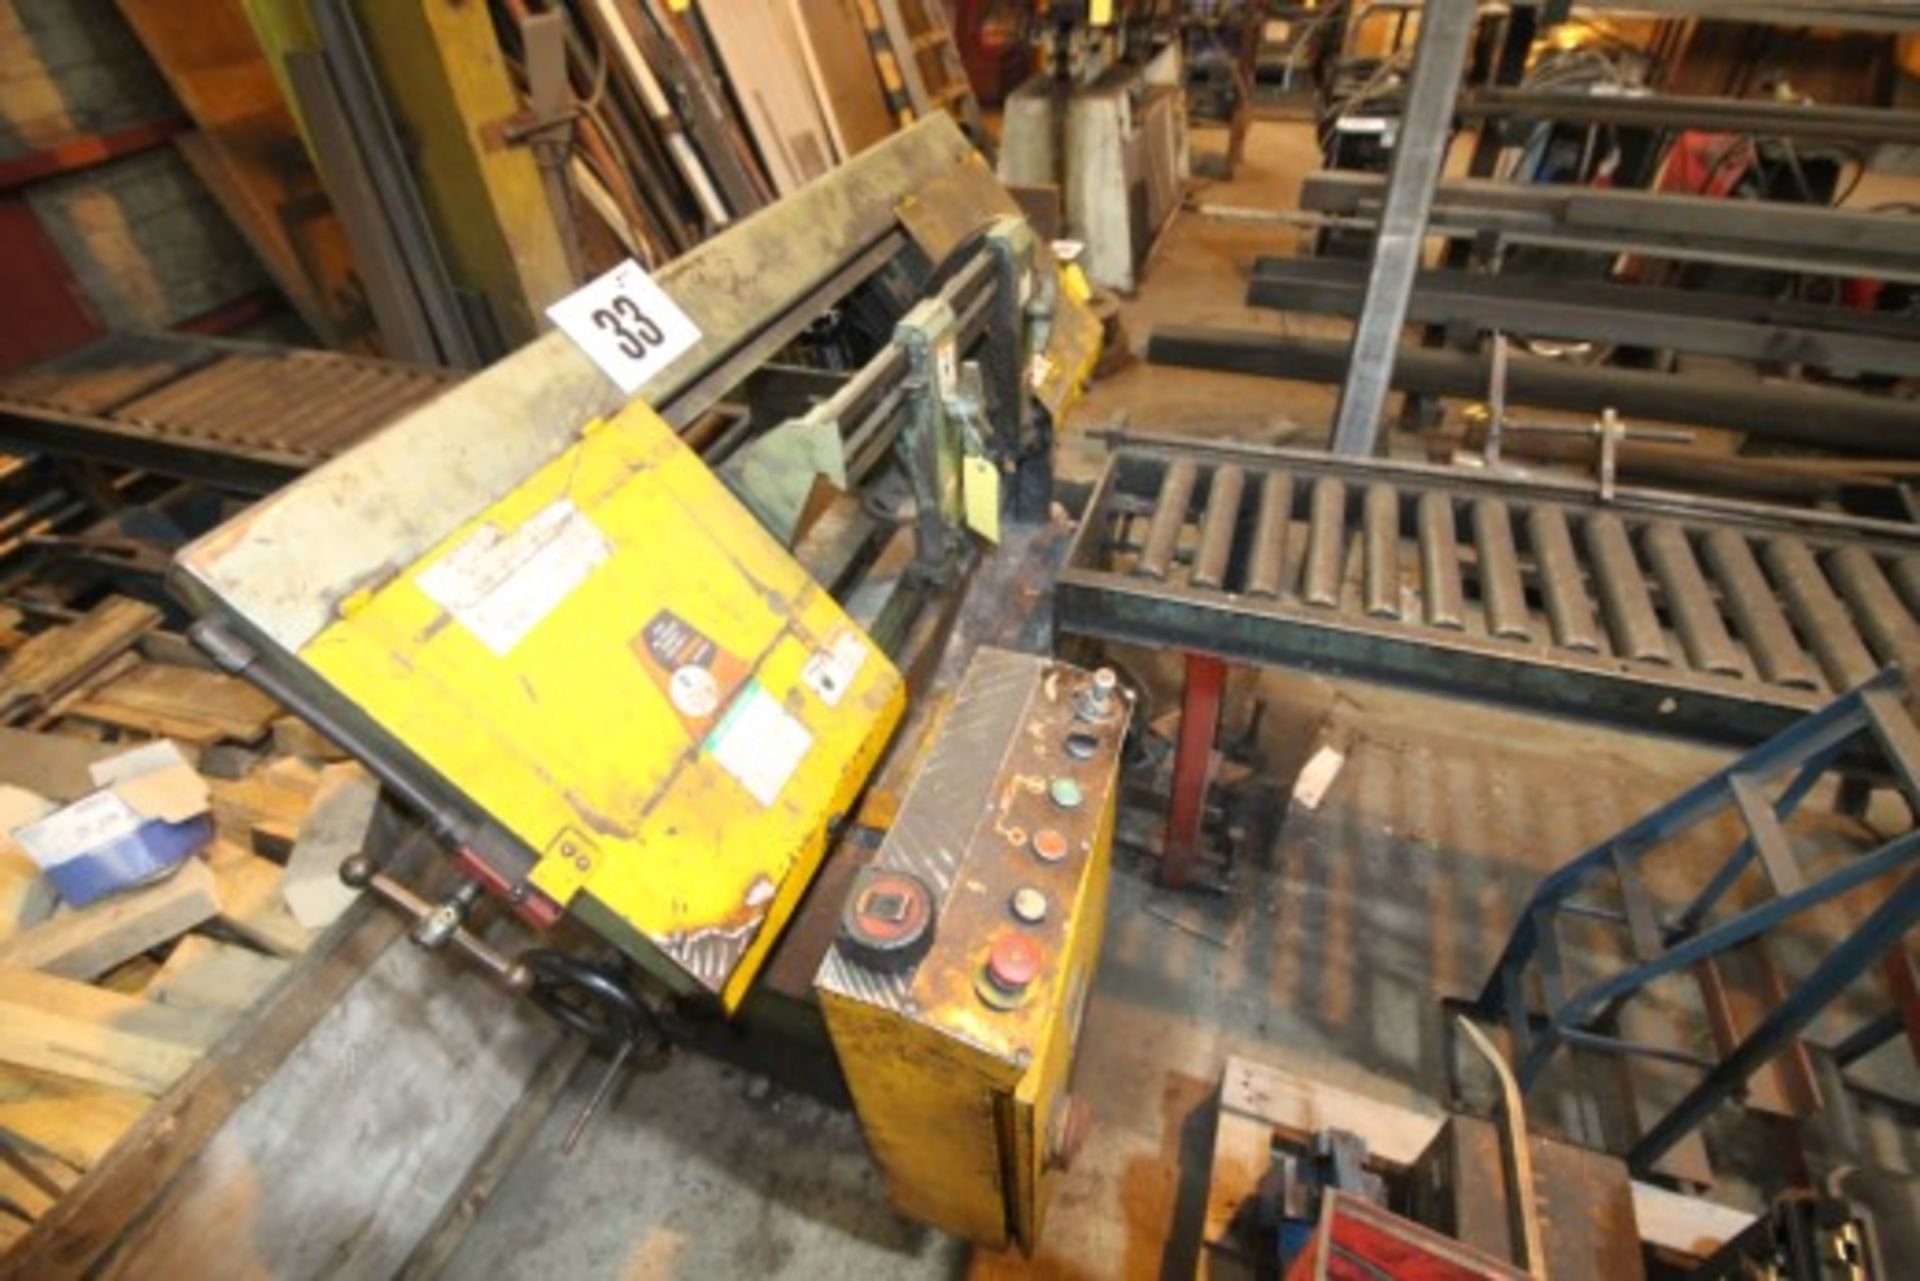 ADDISON SEMI AUTOMATIC BAND SAW COMPLETE WITH FEED-IN / FEED-OUT ROLLS, MODEL MH101611, 3-PHASE - Image 2 of 2